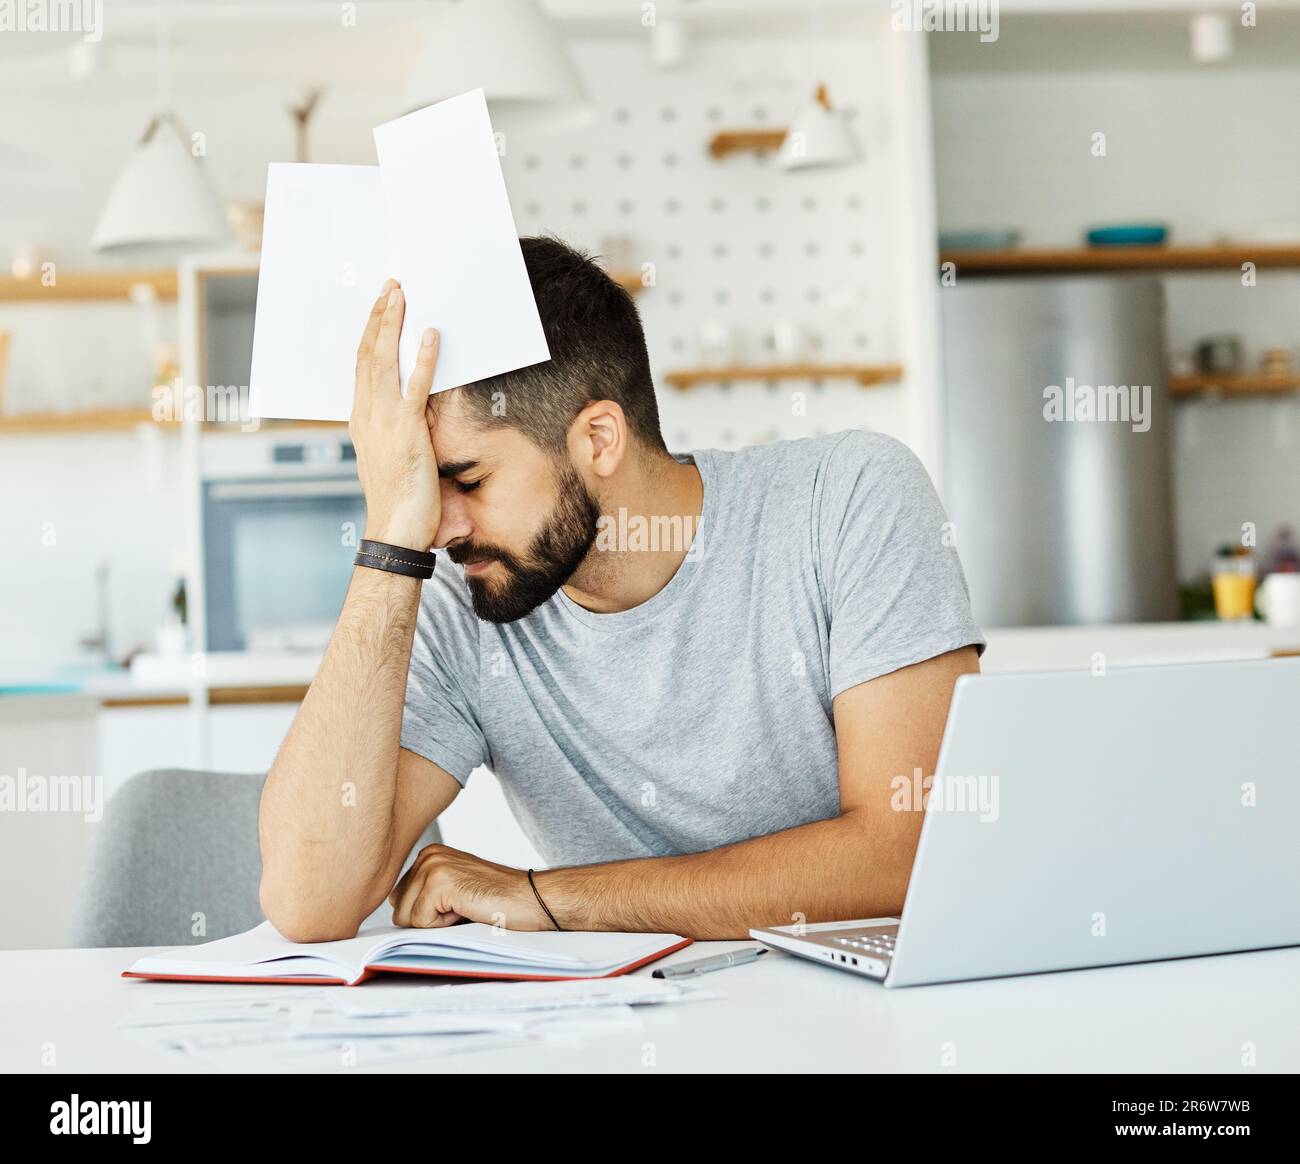 laptop man computer home tired young headache business problem study worried stress reading Stock Photo